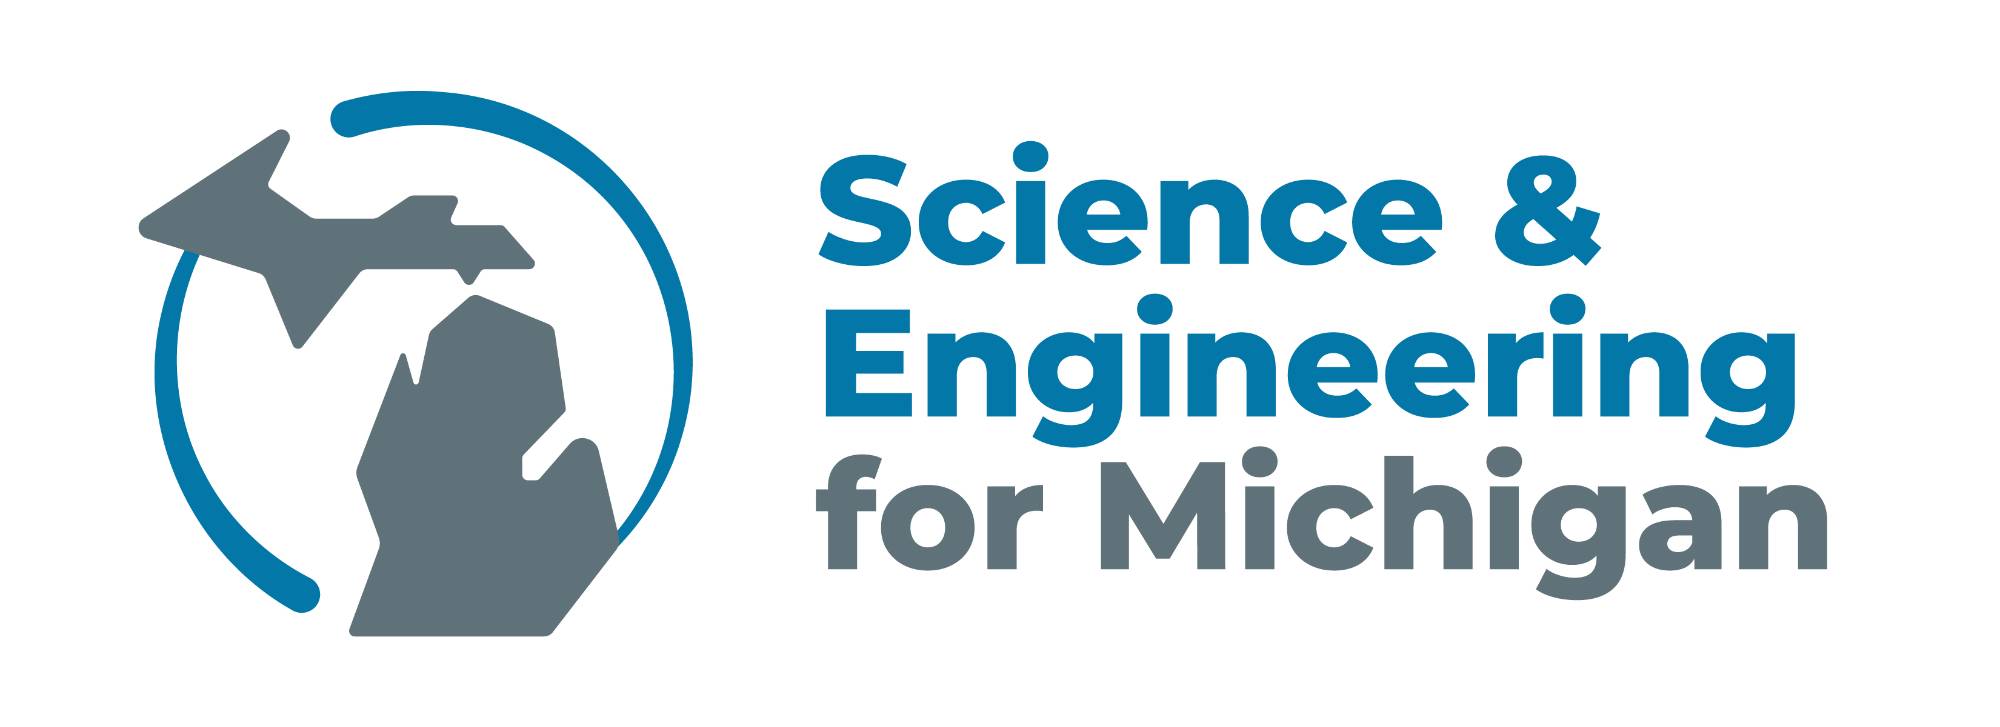 Science and Engineering for Michigan Collaborative logo